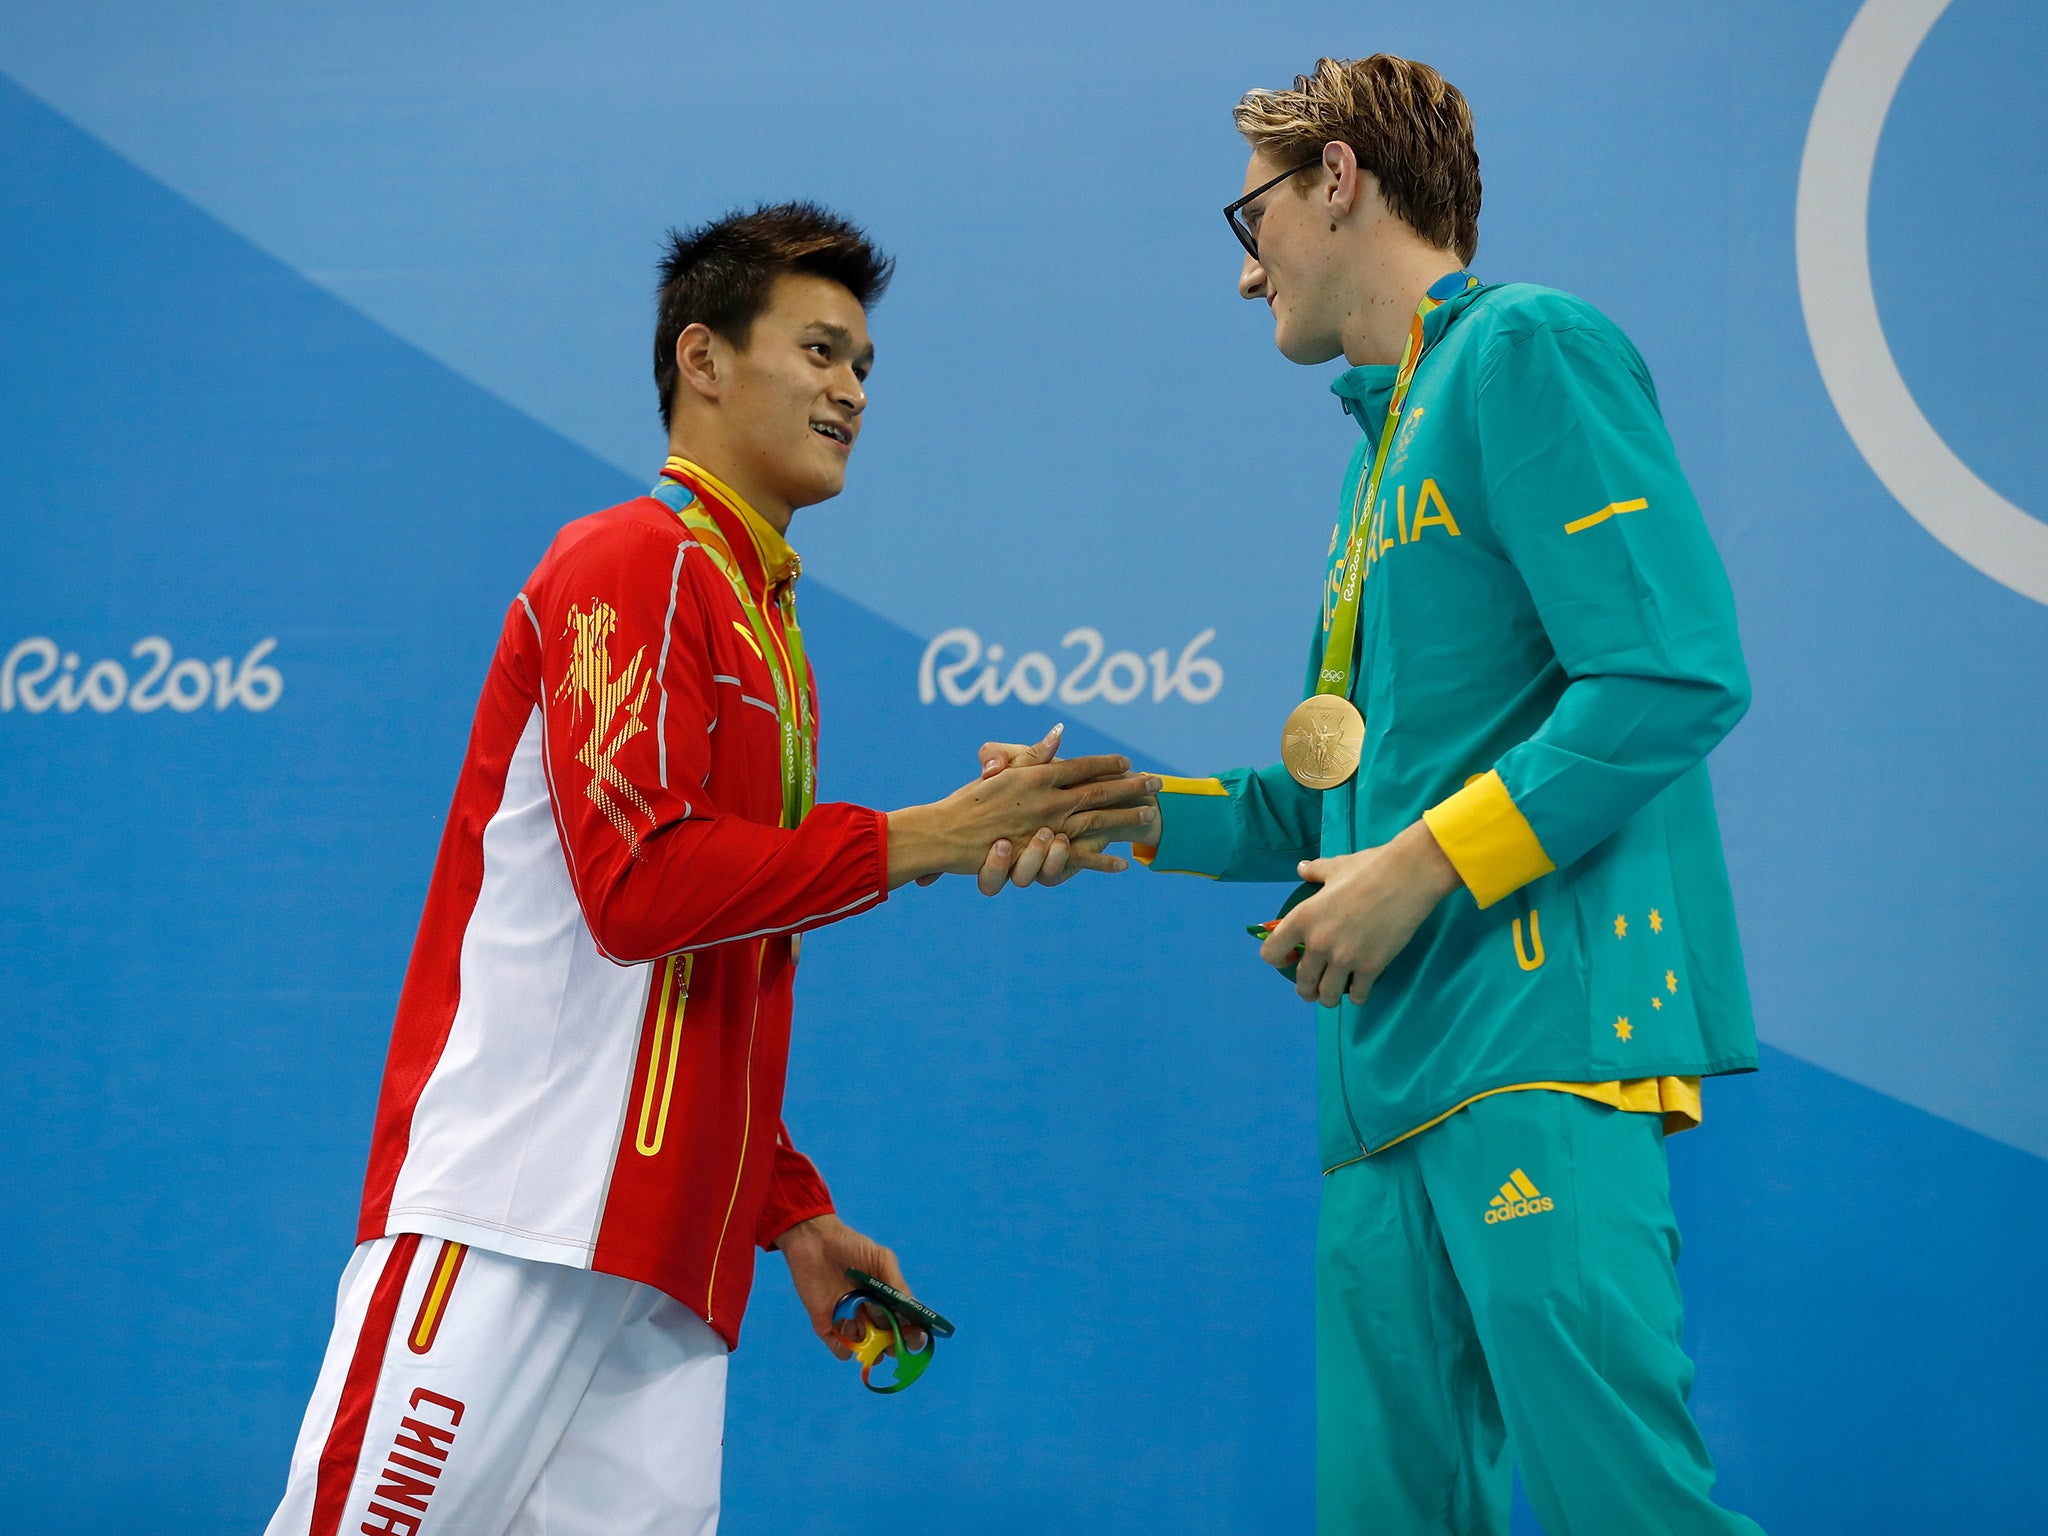 Mack Horton and Sun Yang did shake hands during the medal ceremony